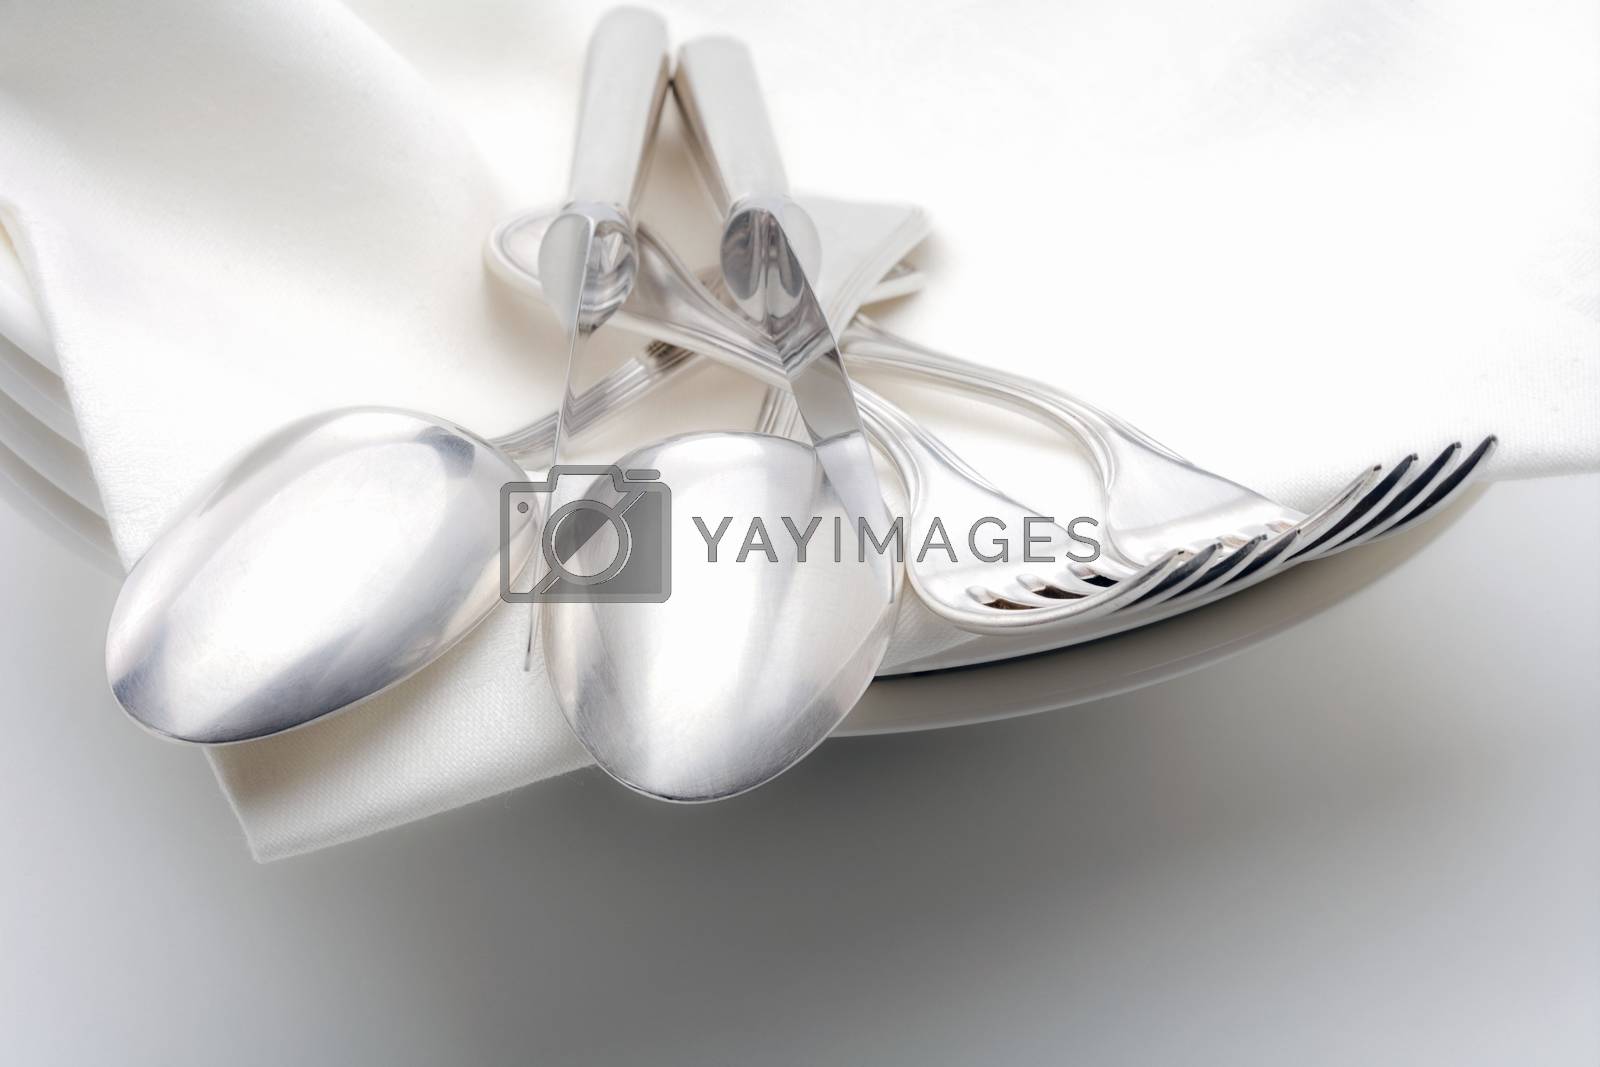 Royalty free image of silverware by courtyardpix